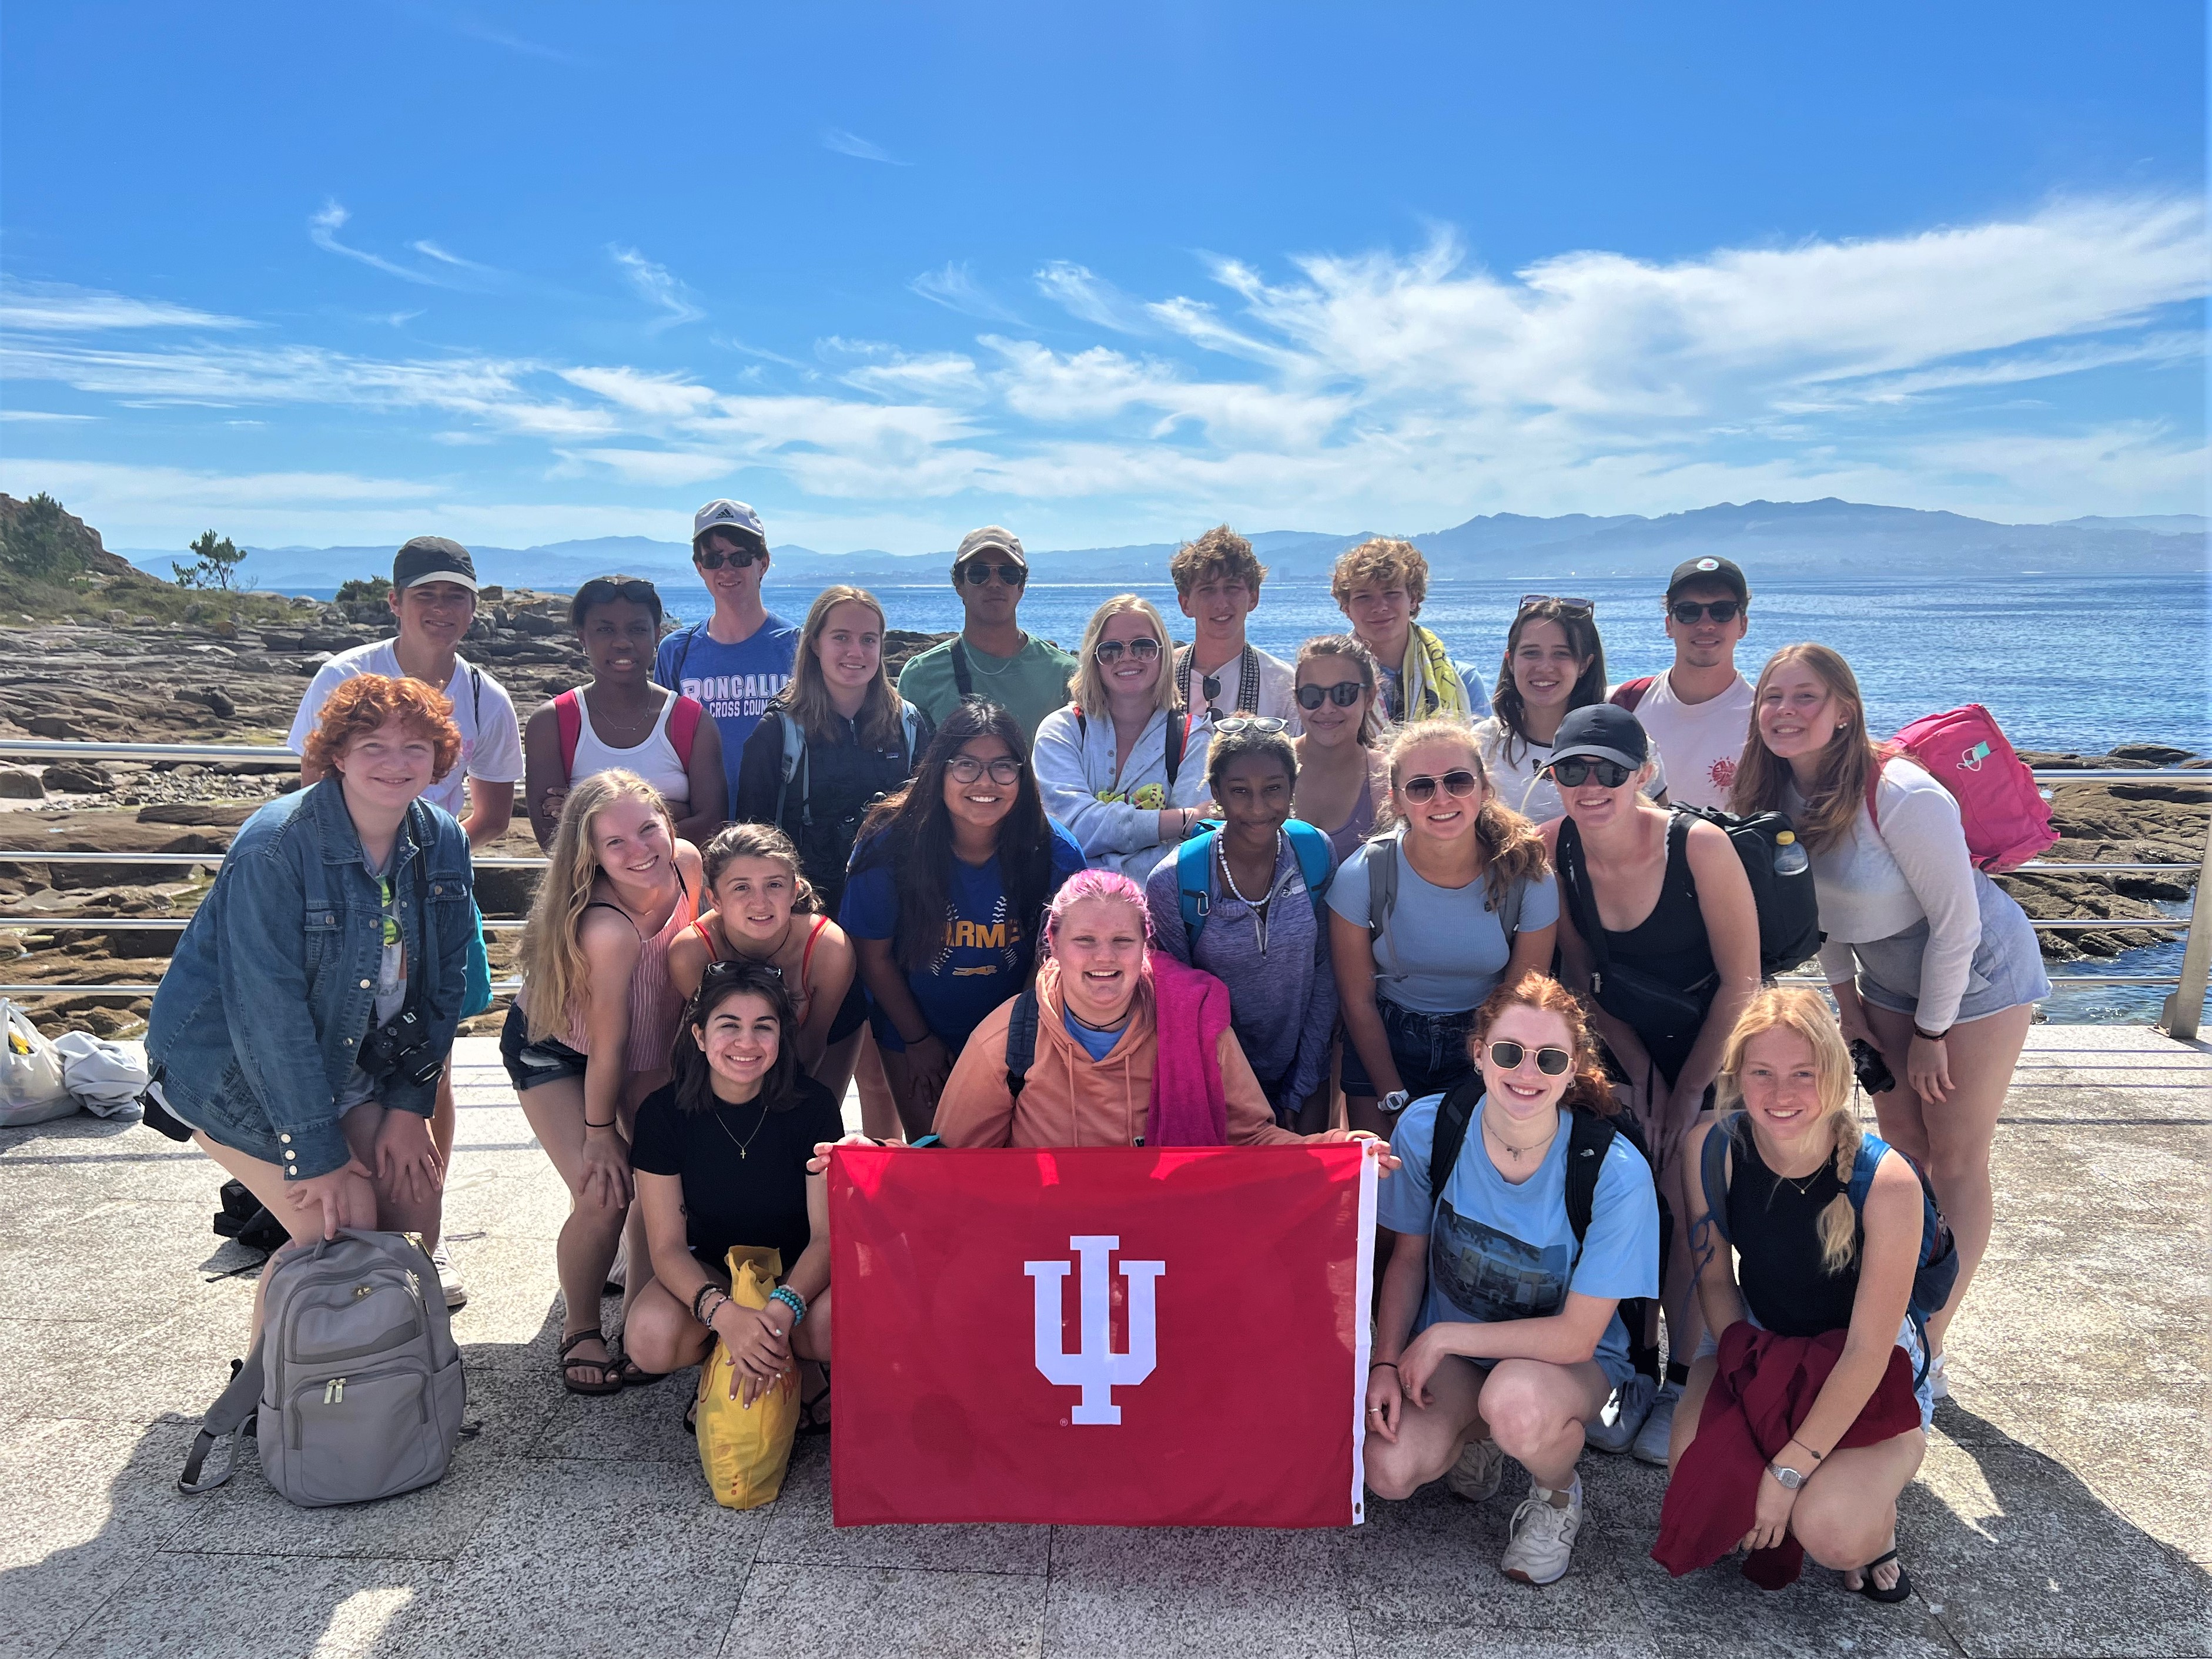 Group of students with IU flag in front of a body of water